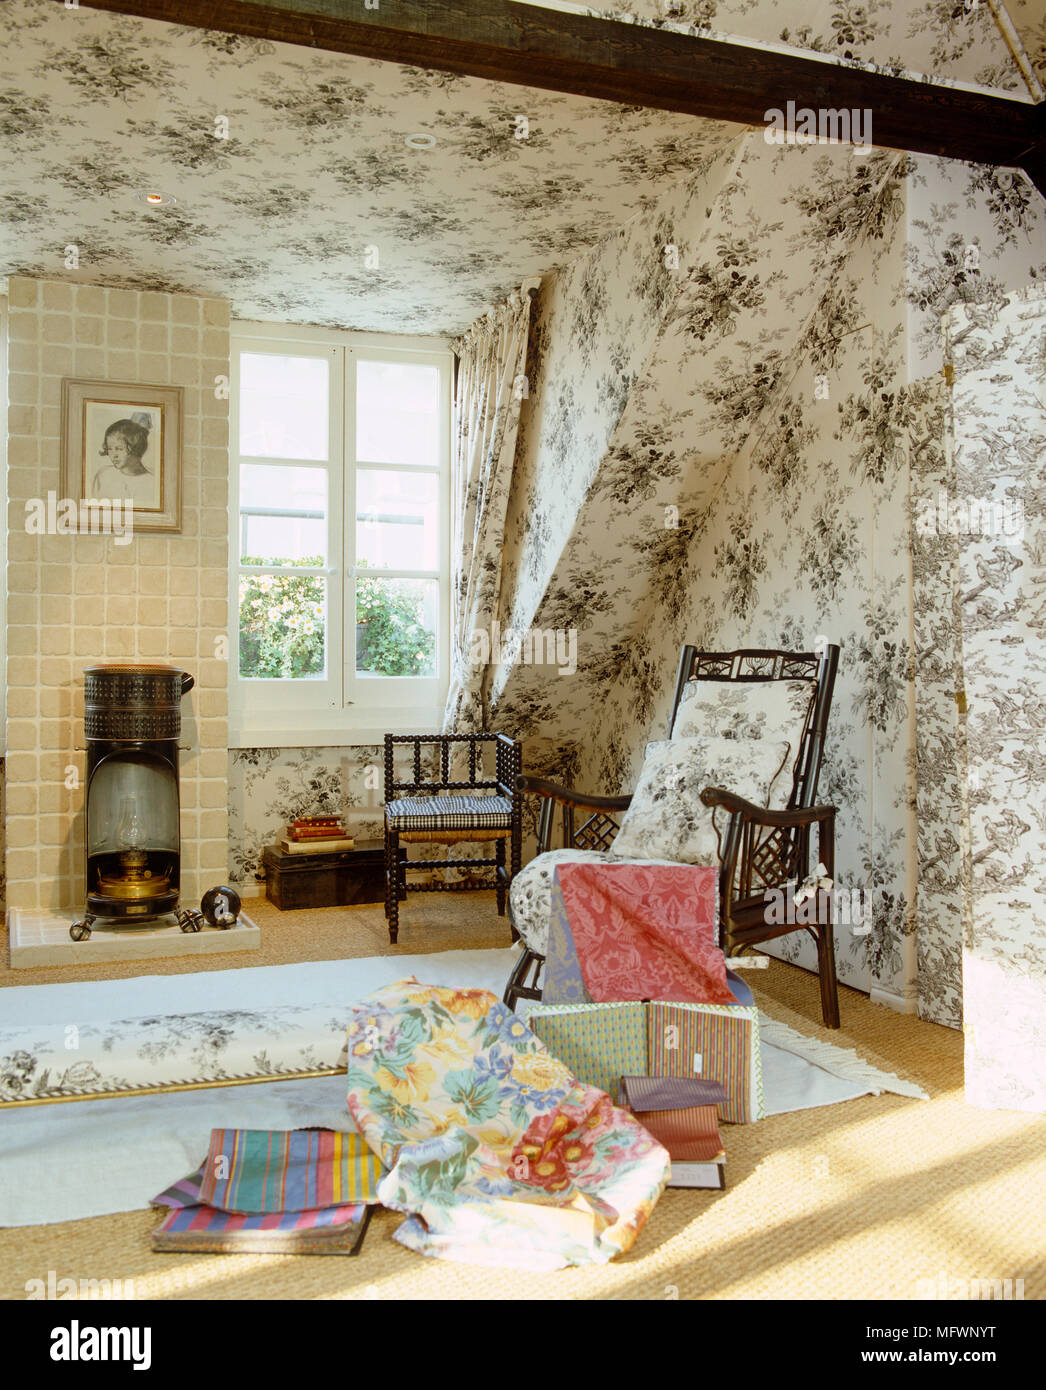 Fabrics in front of wooden chair in sitting room with toile de Jouy pattern wallpaper Stock Photo